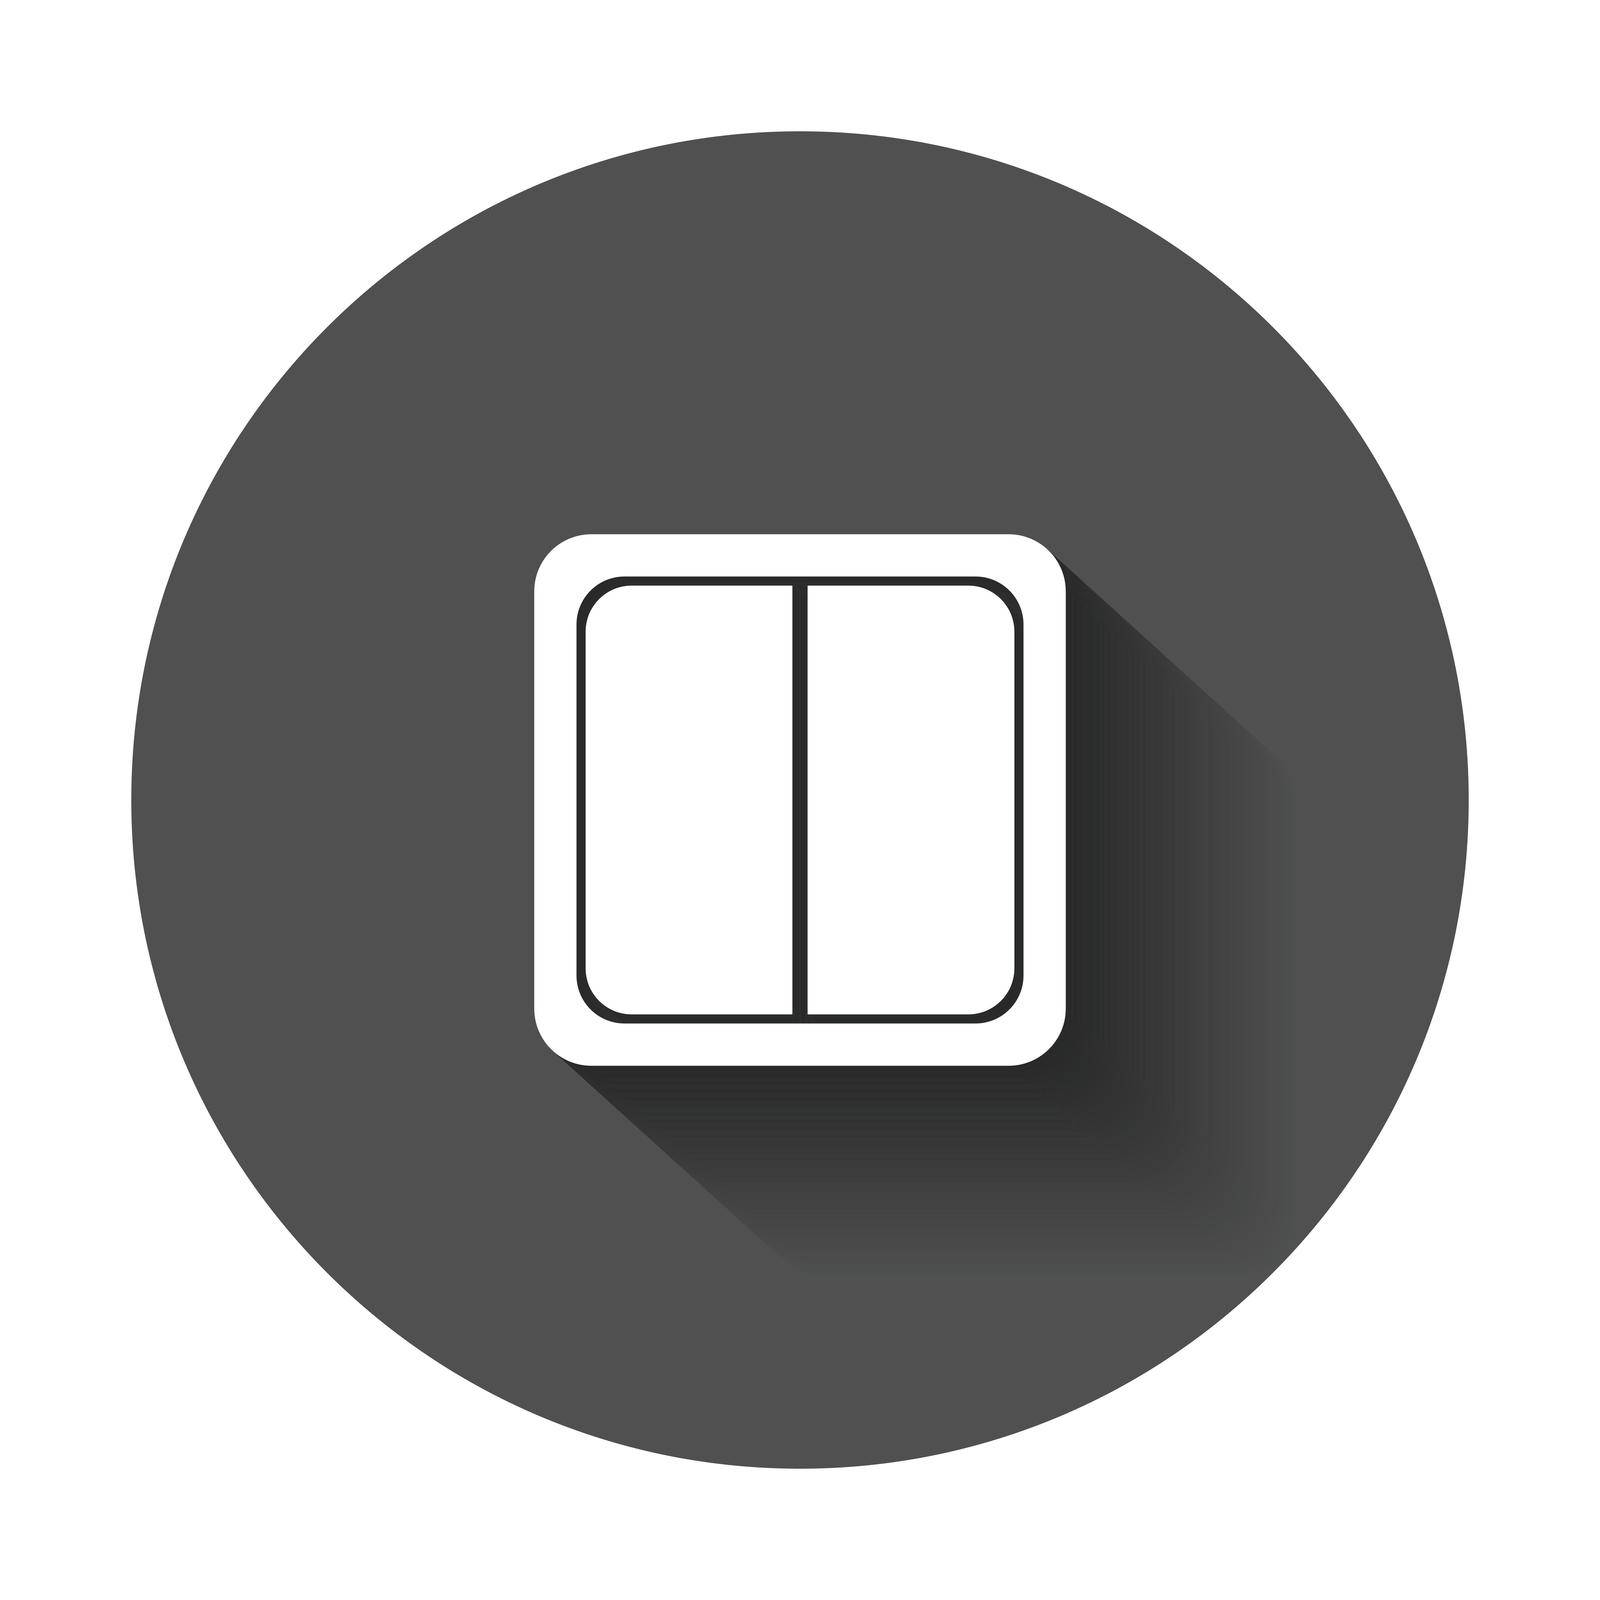 Electric light switch icon. Electric switch flat vector illustration with long shadow.